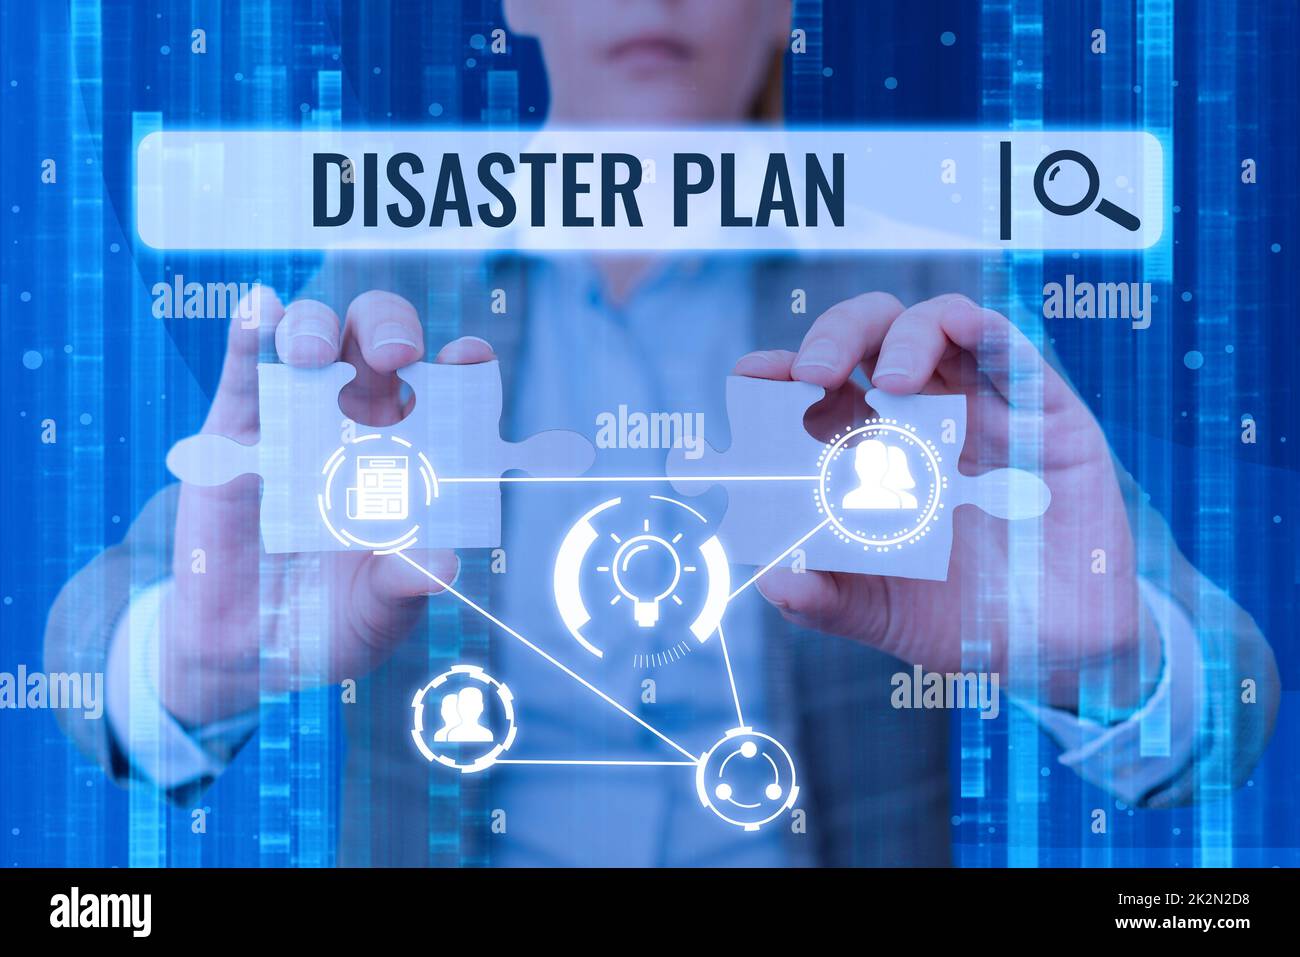 Sign displaying Disaster Plan. Business concept Respond to Emergency Preparedness Survival and First Aid Kit Lady in suit holding two puzzle pieces representing innovative thinking. Stock Photo